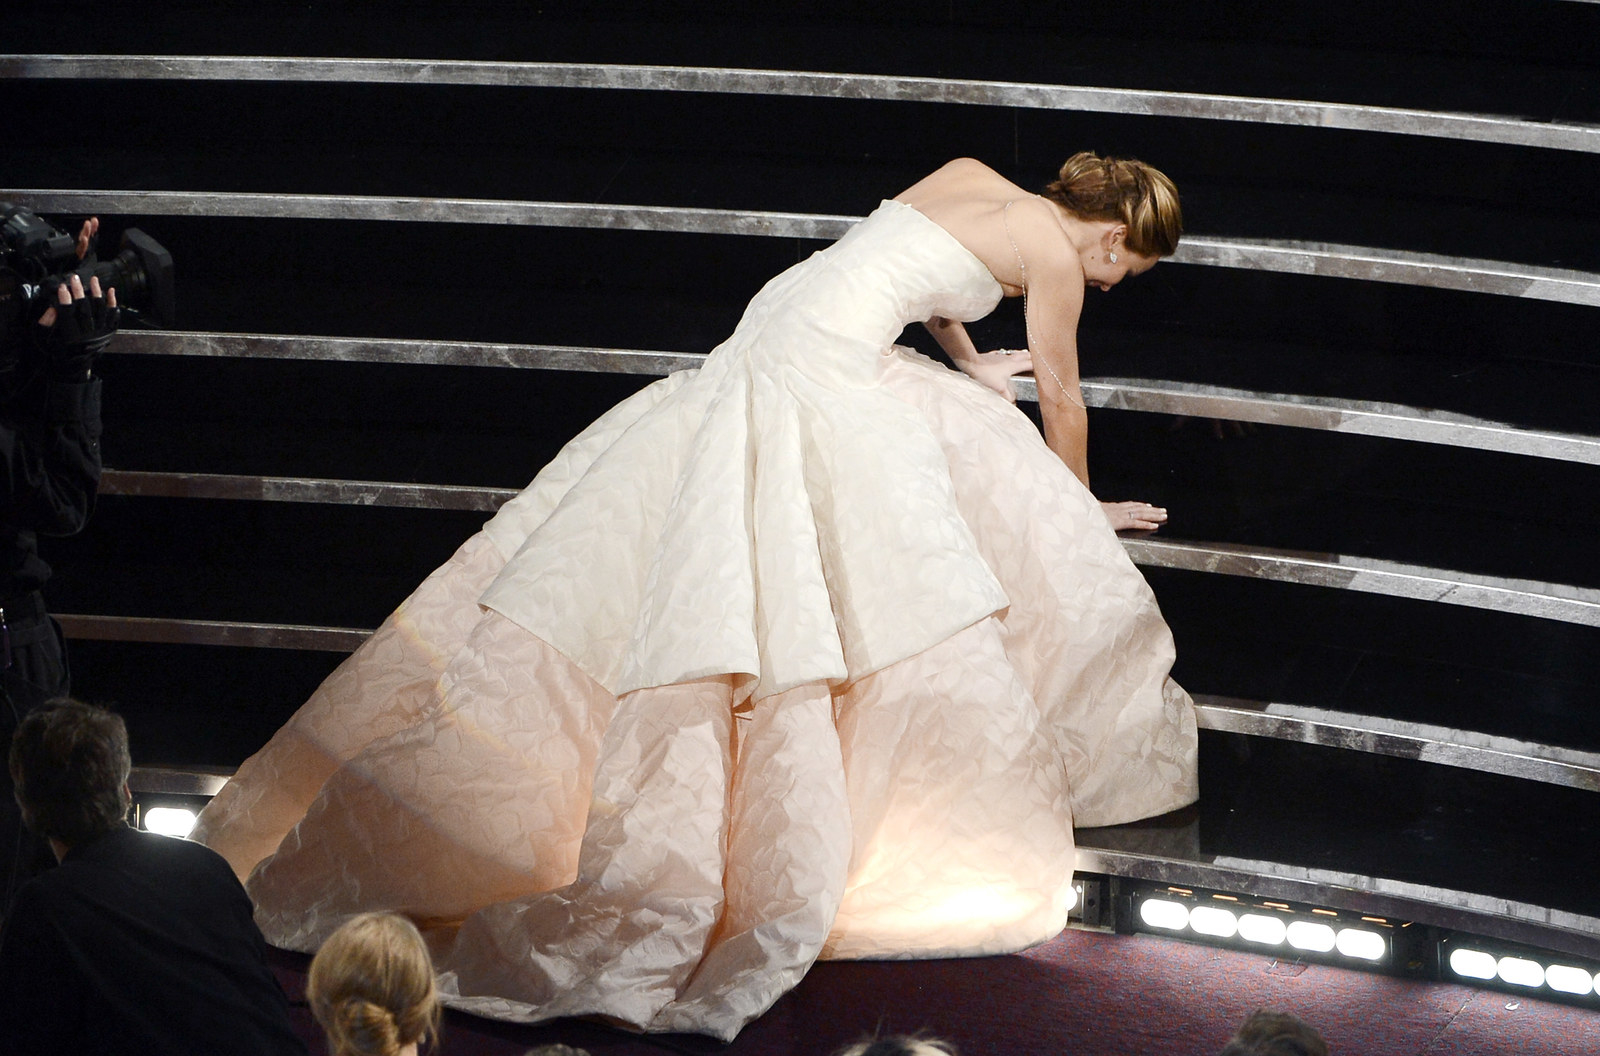 jennifer on the stairs